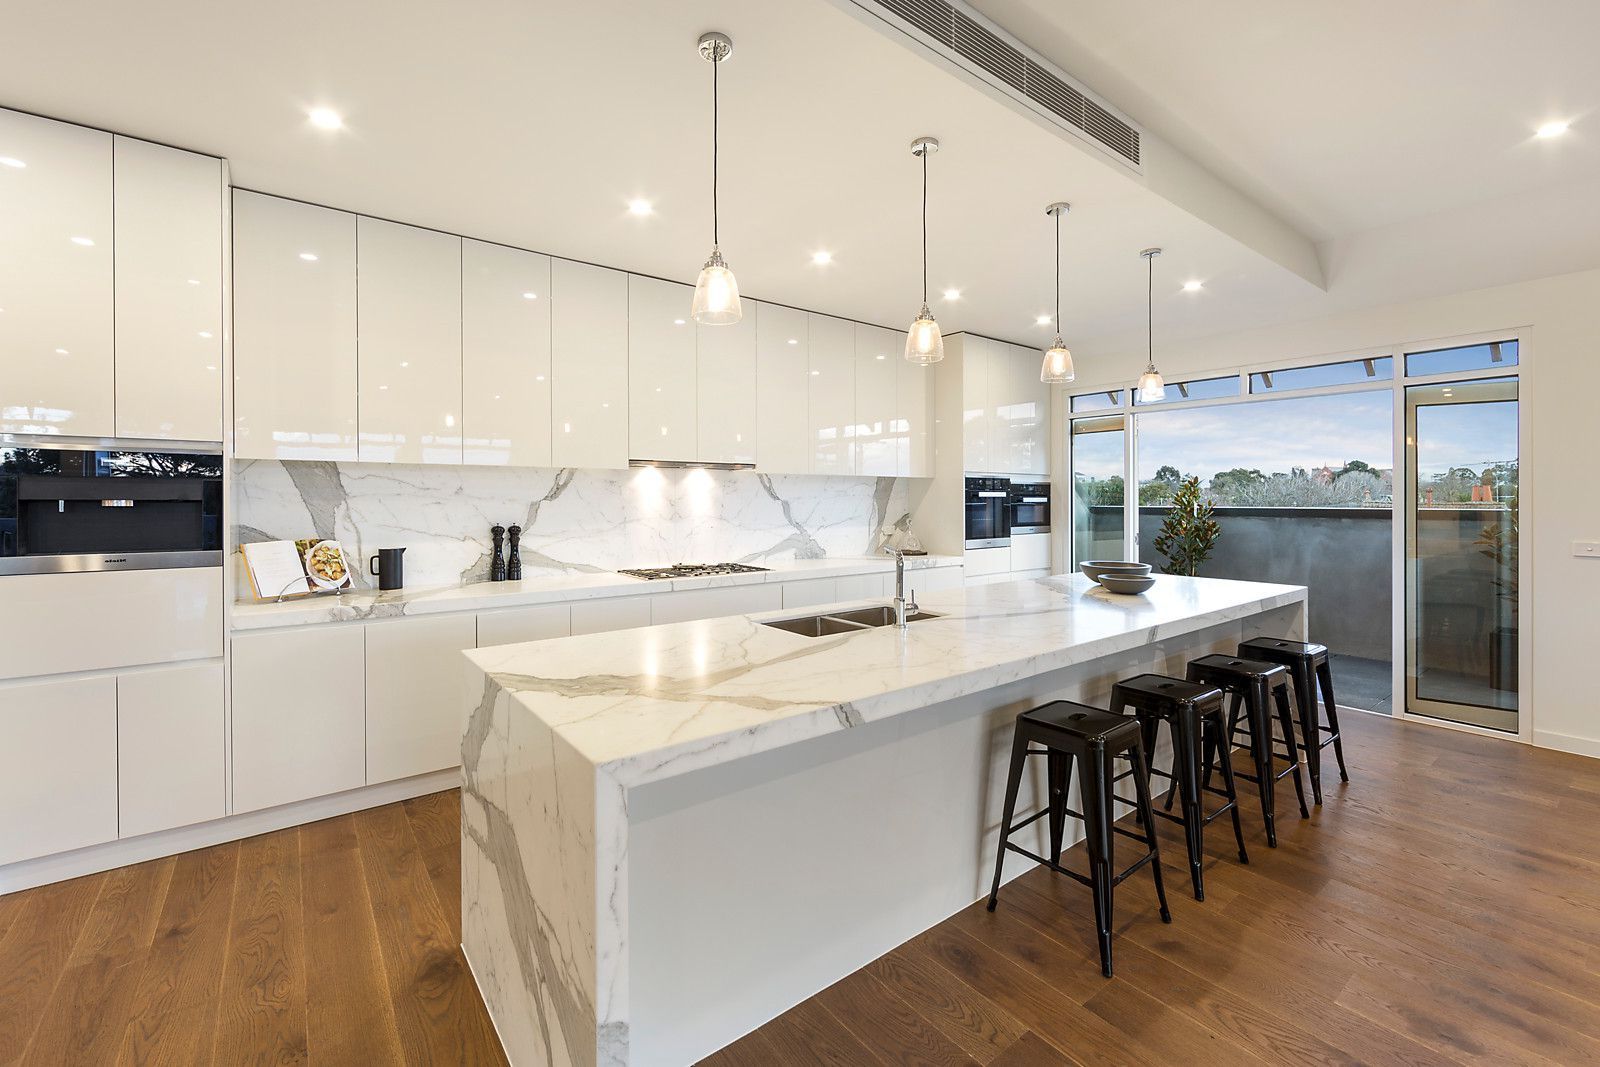 Upland Marble Kitchen Islands With Regard To Well Known Modern White Marble Kitchen With Gloss Cabinetry And Pendant (View 3 of 25)